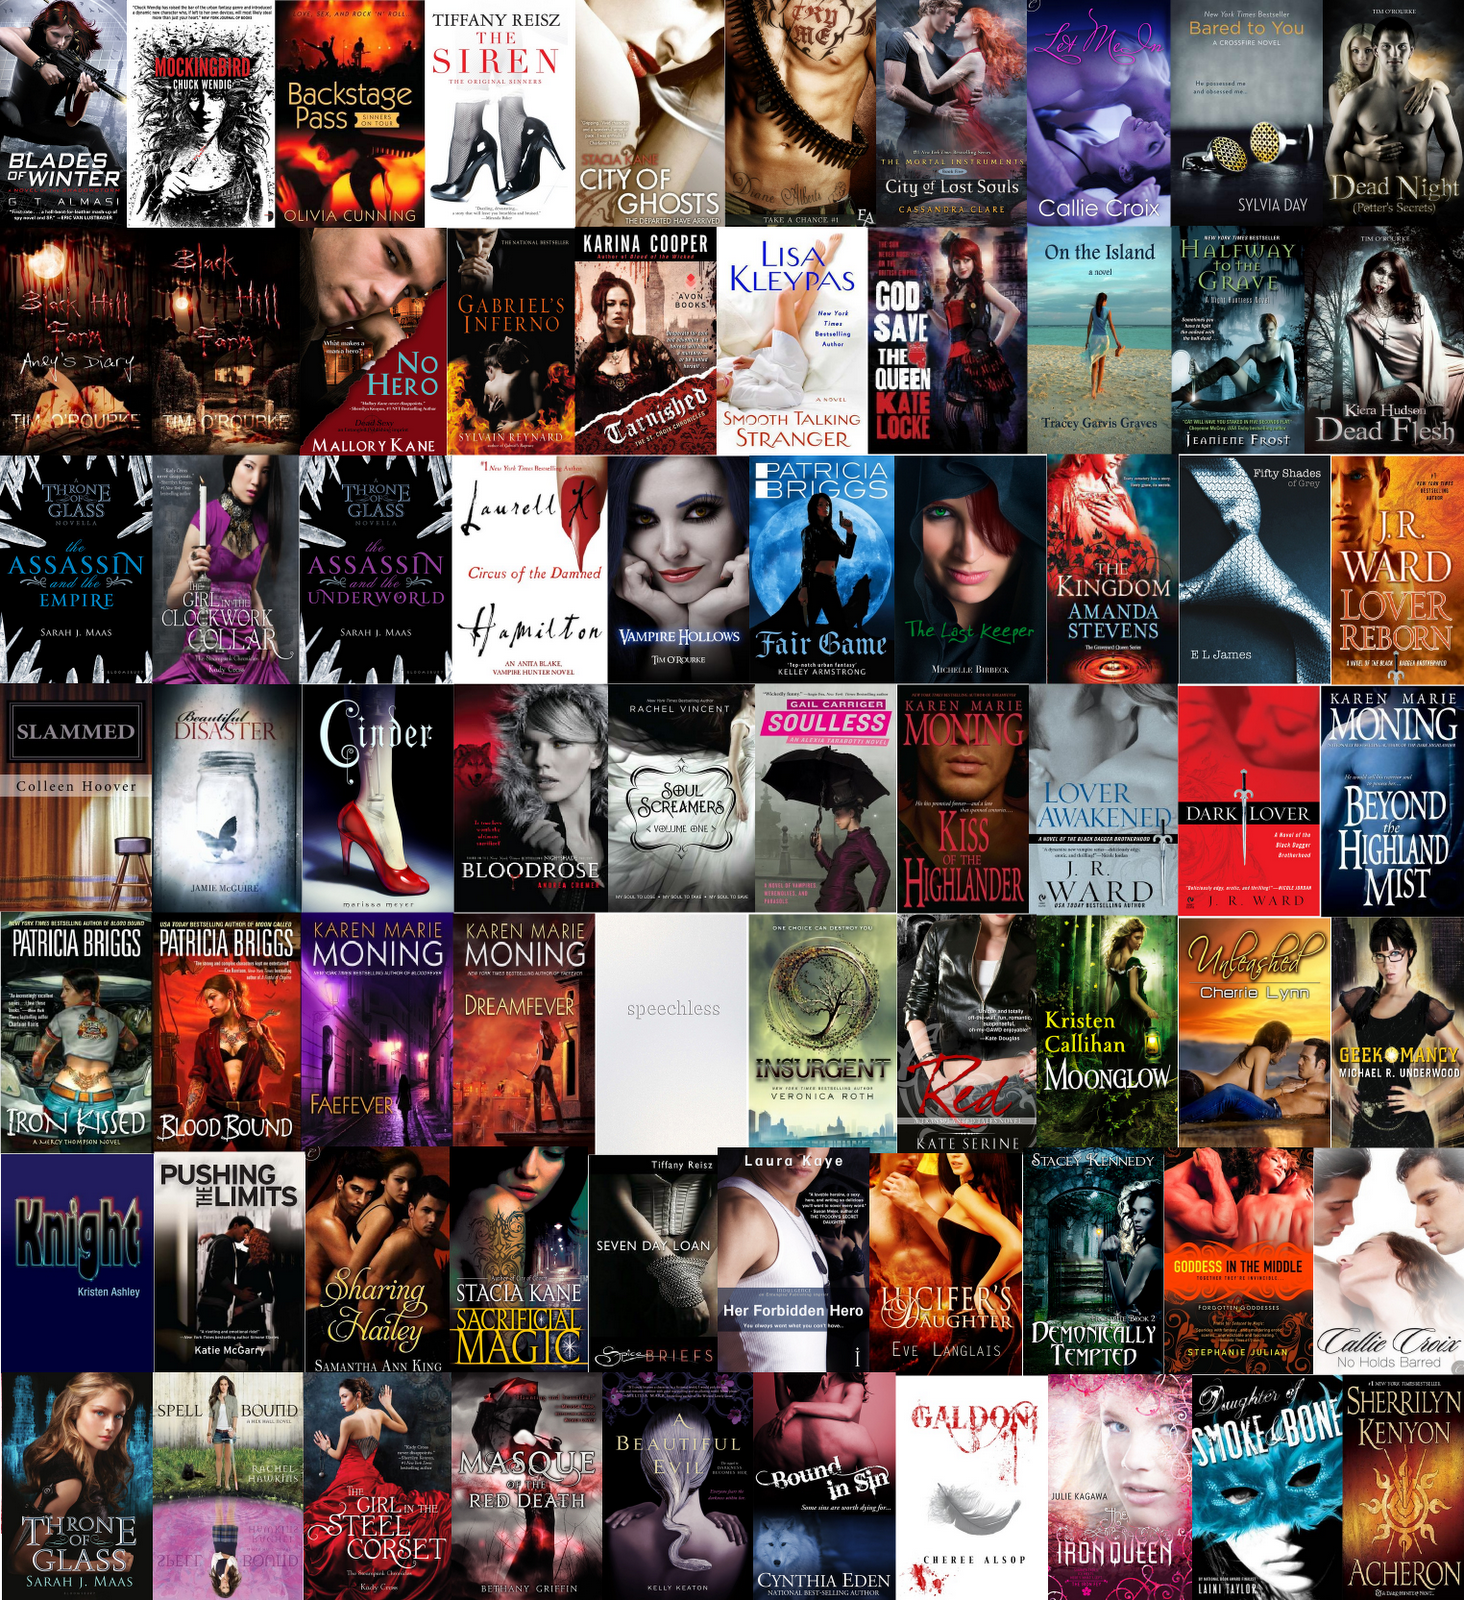 YA books collage, but what is Fifty Shades doing in there ...